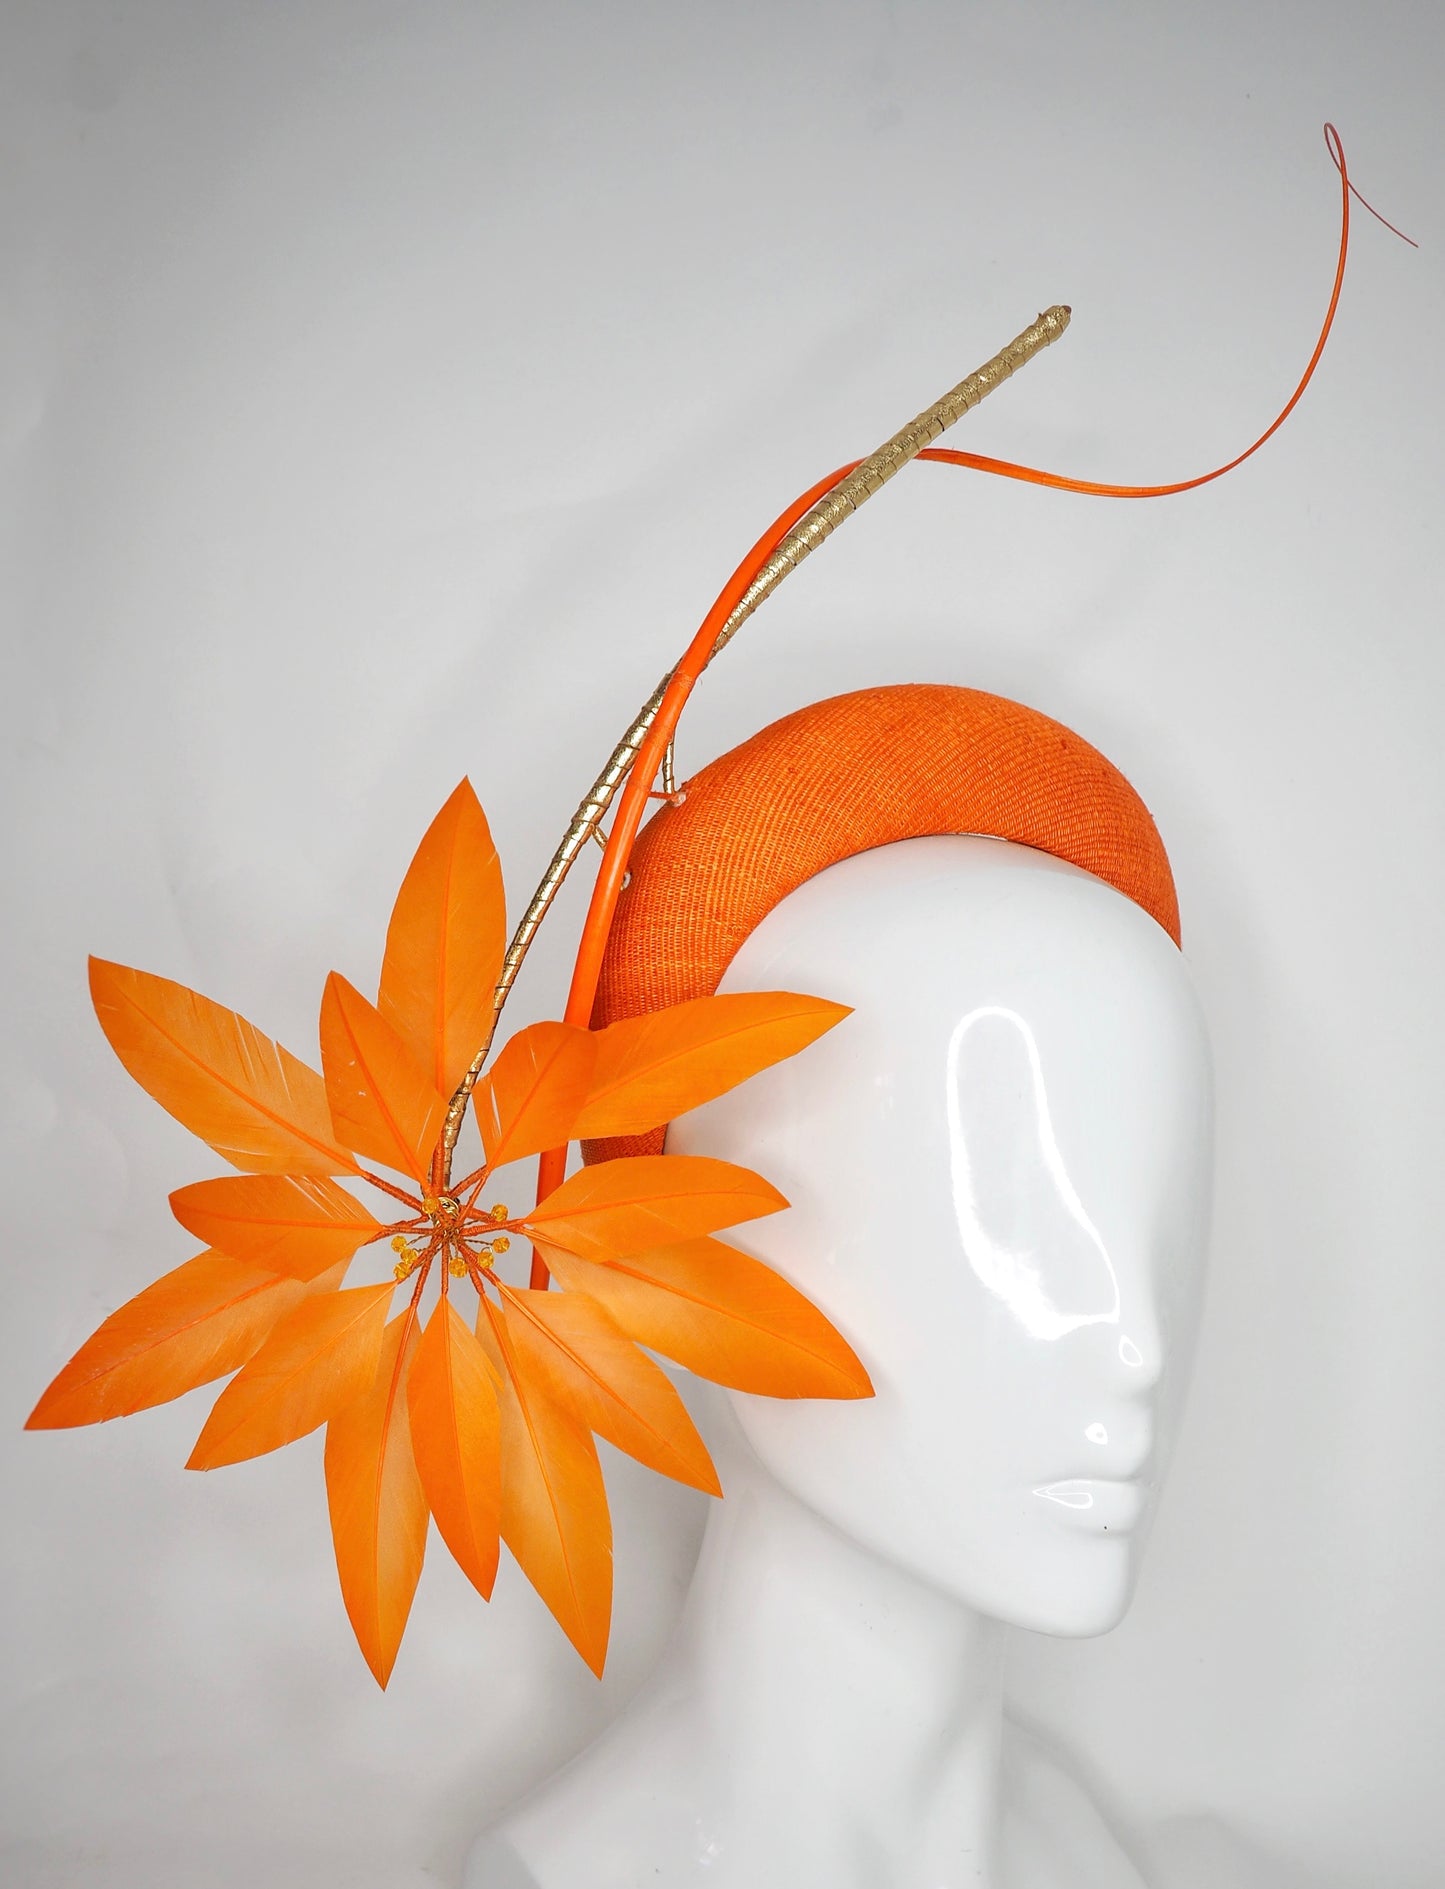 Fireworks - Orange straw base with sculpted quills and leather starburst.